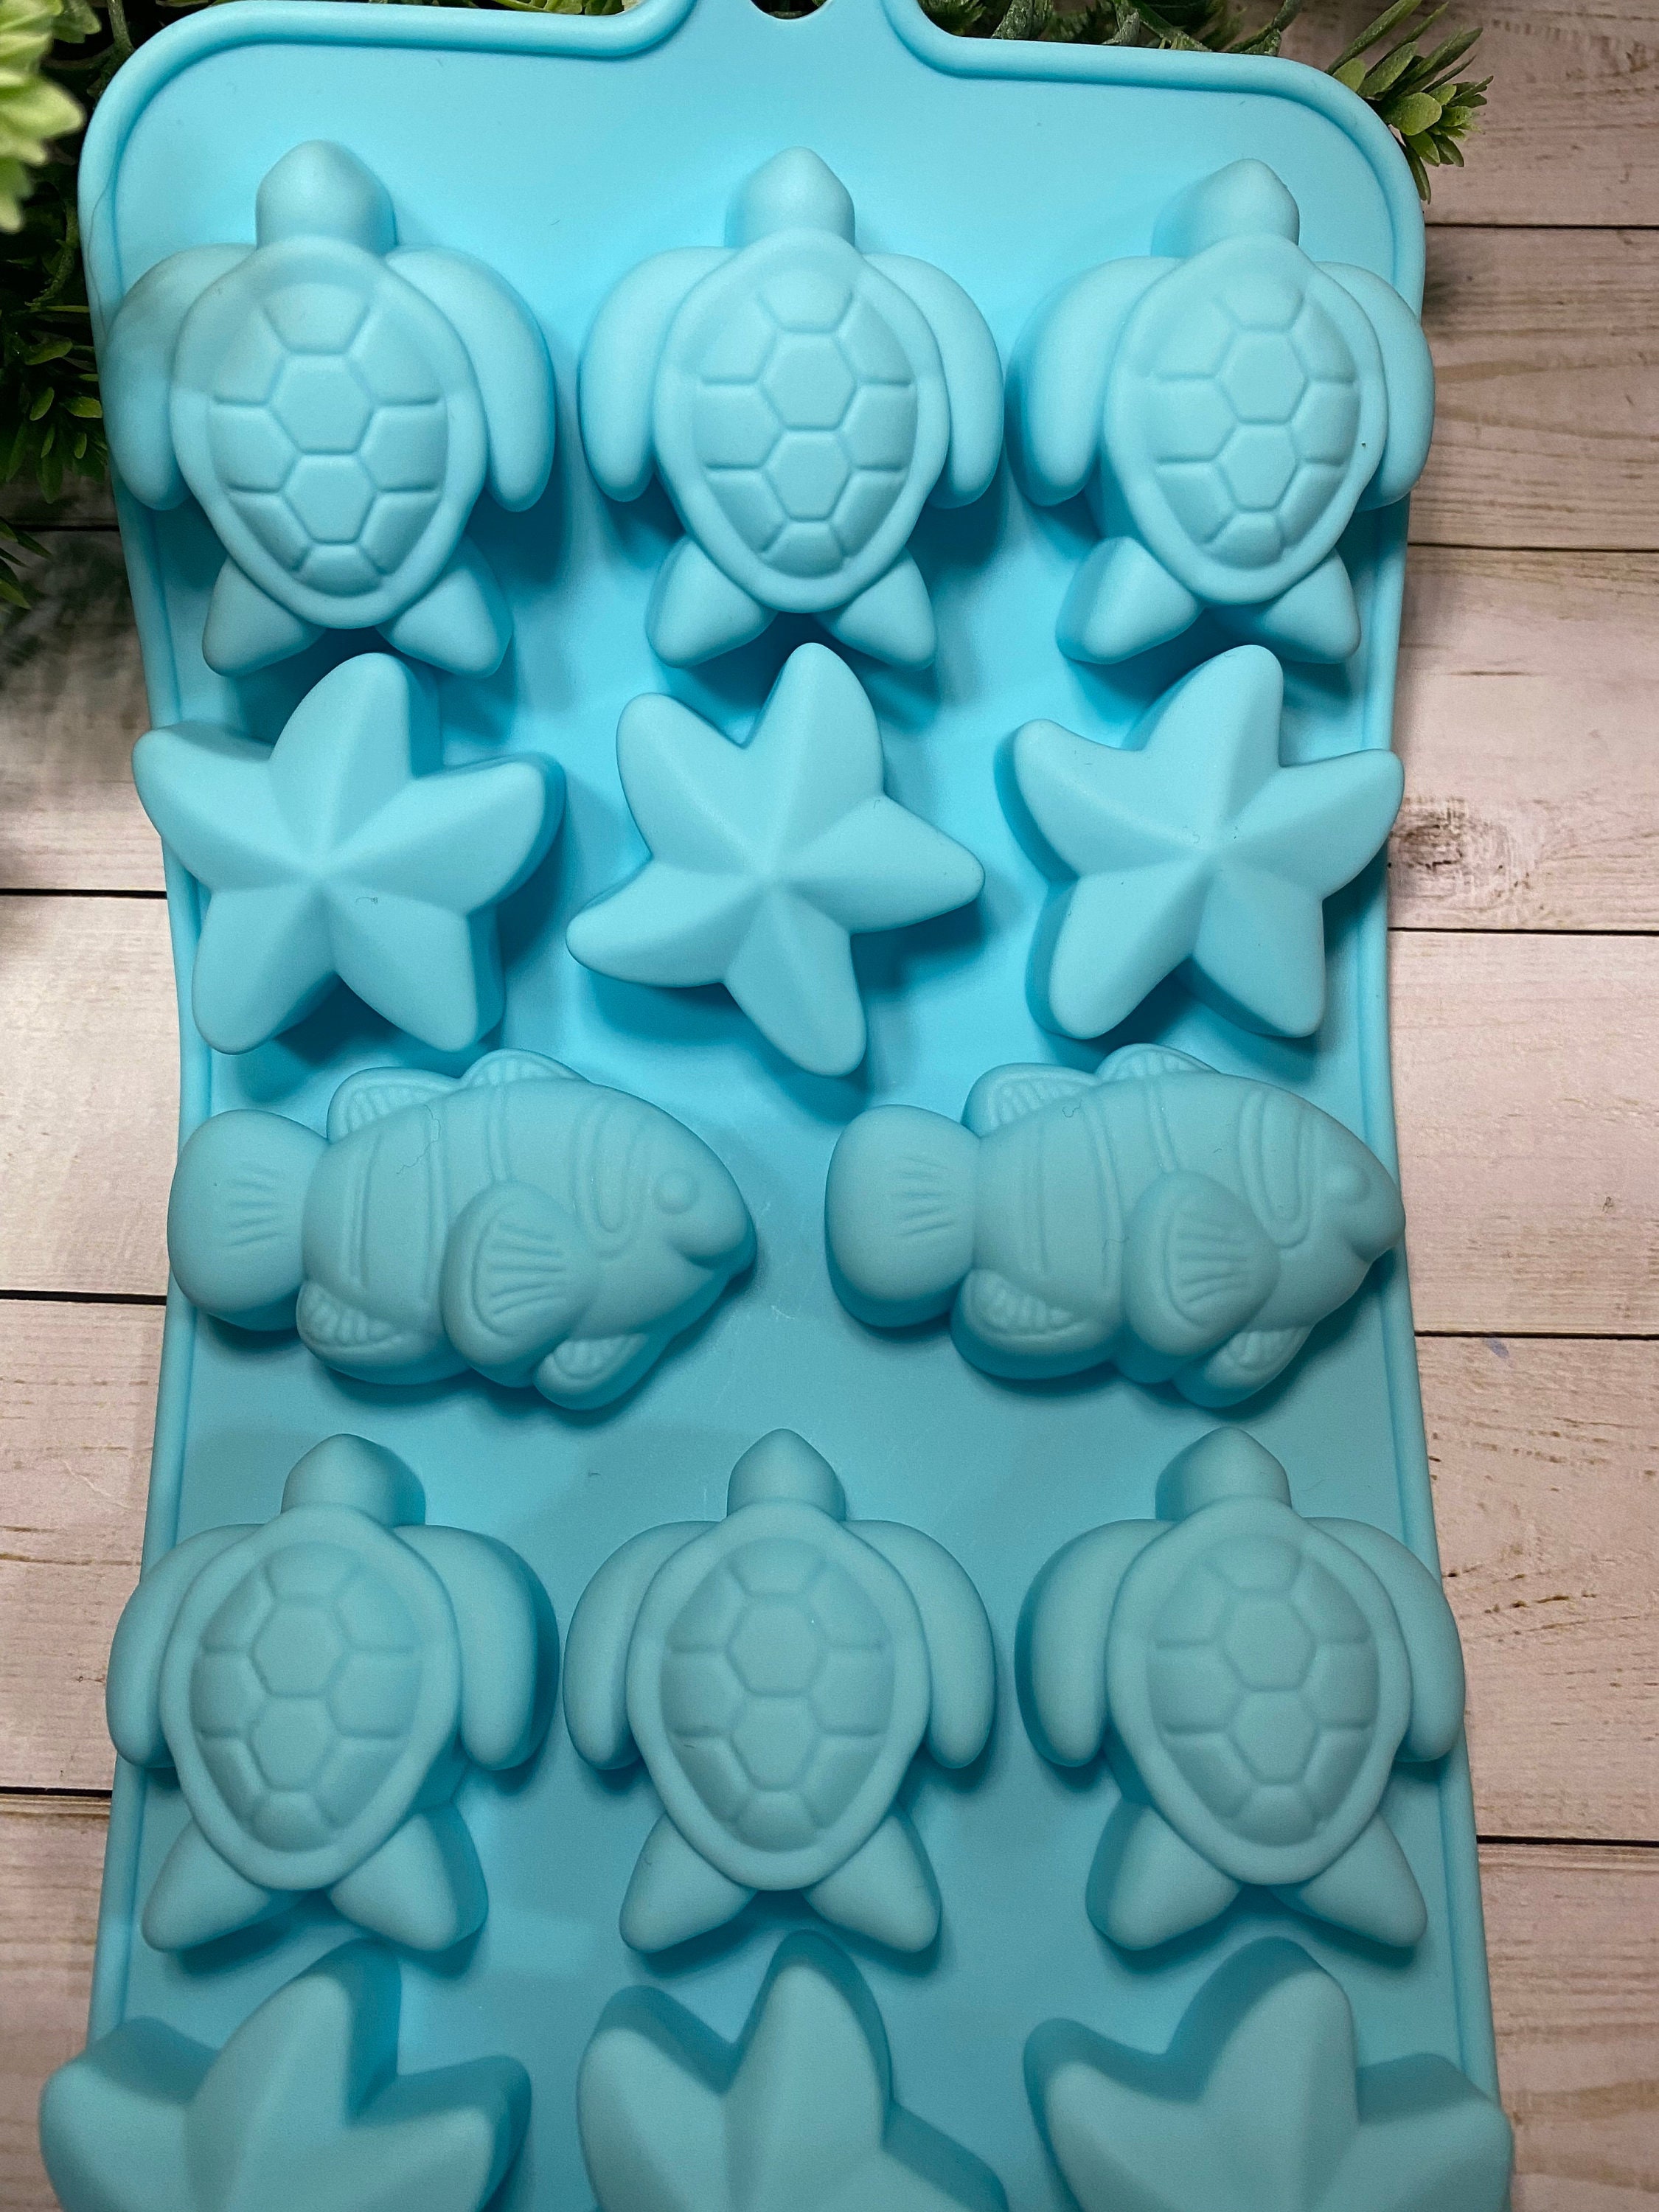 SuoKom Silicone Wave Soap Ocean Mold Wave Silicone Mold for Soap